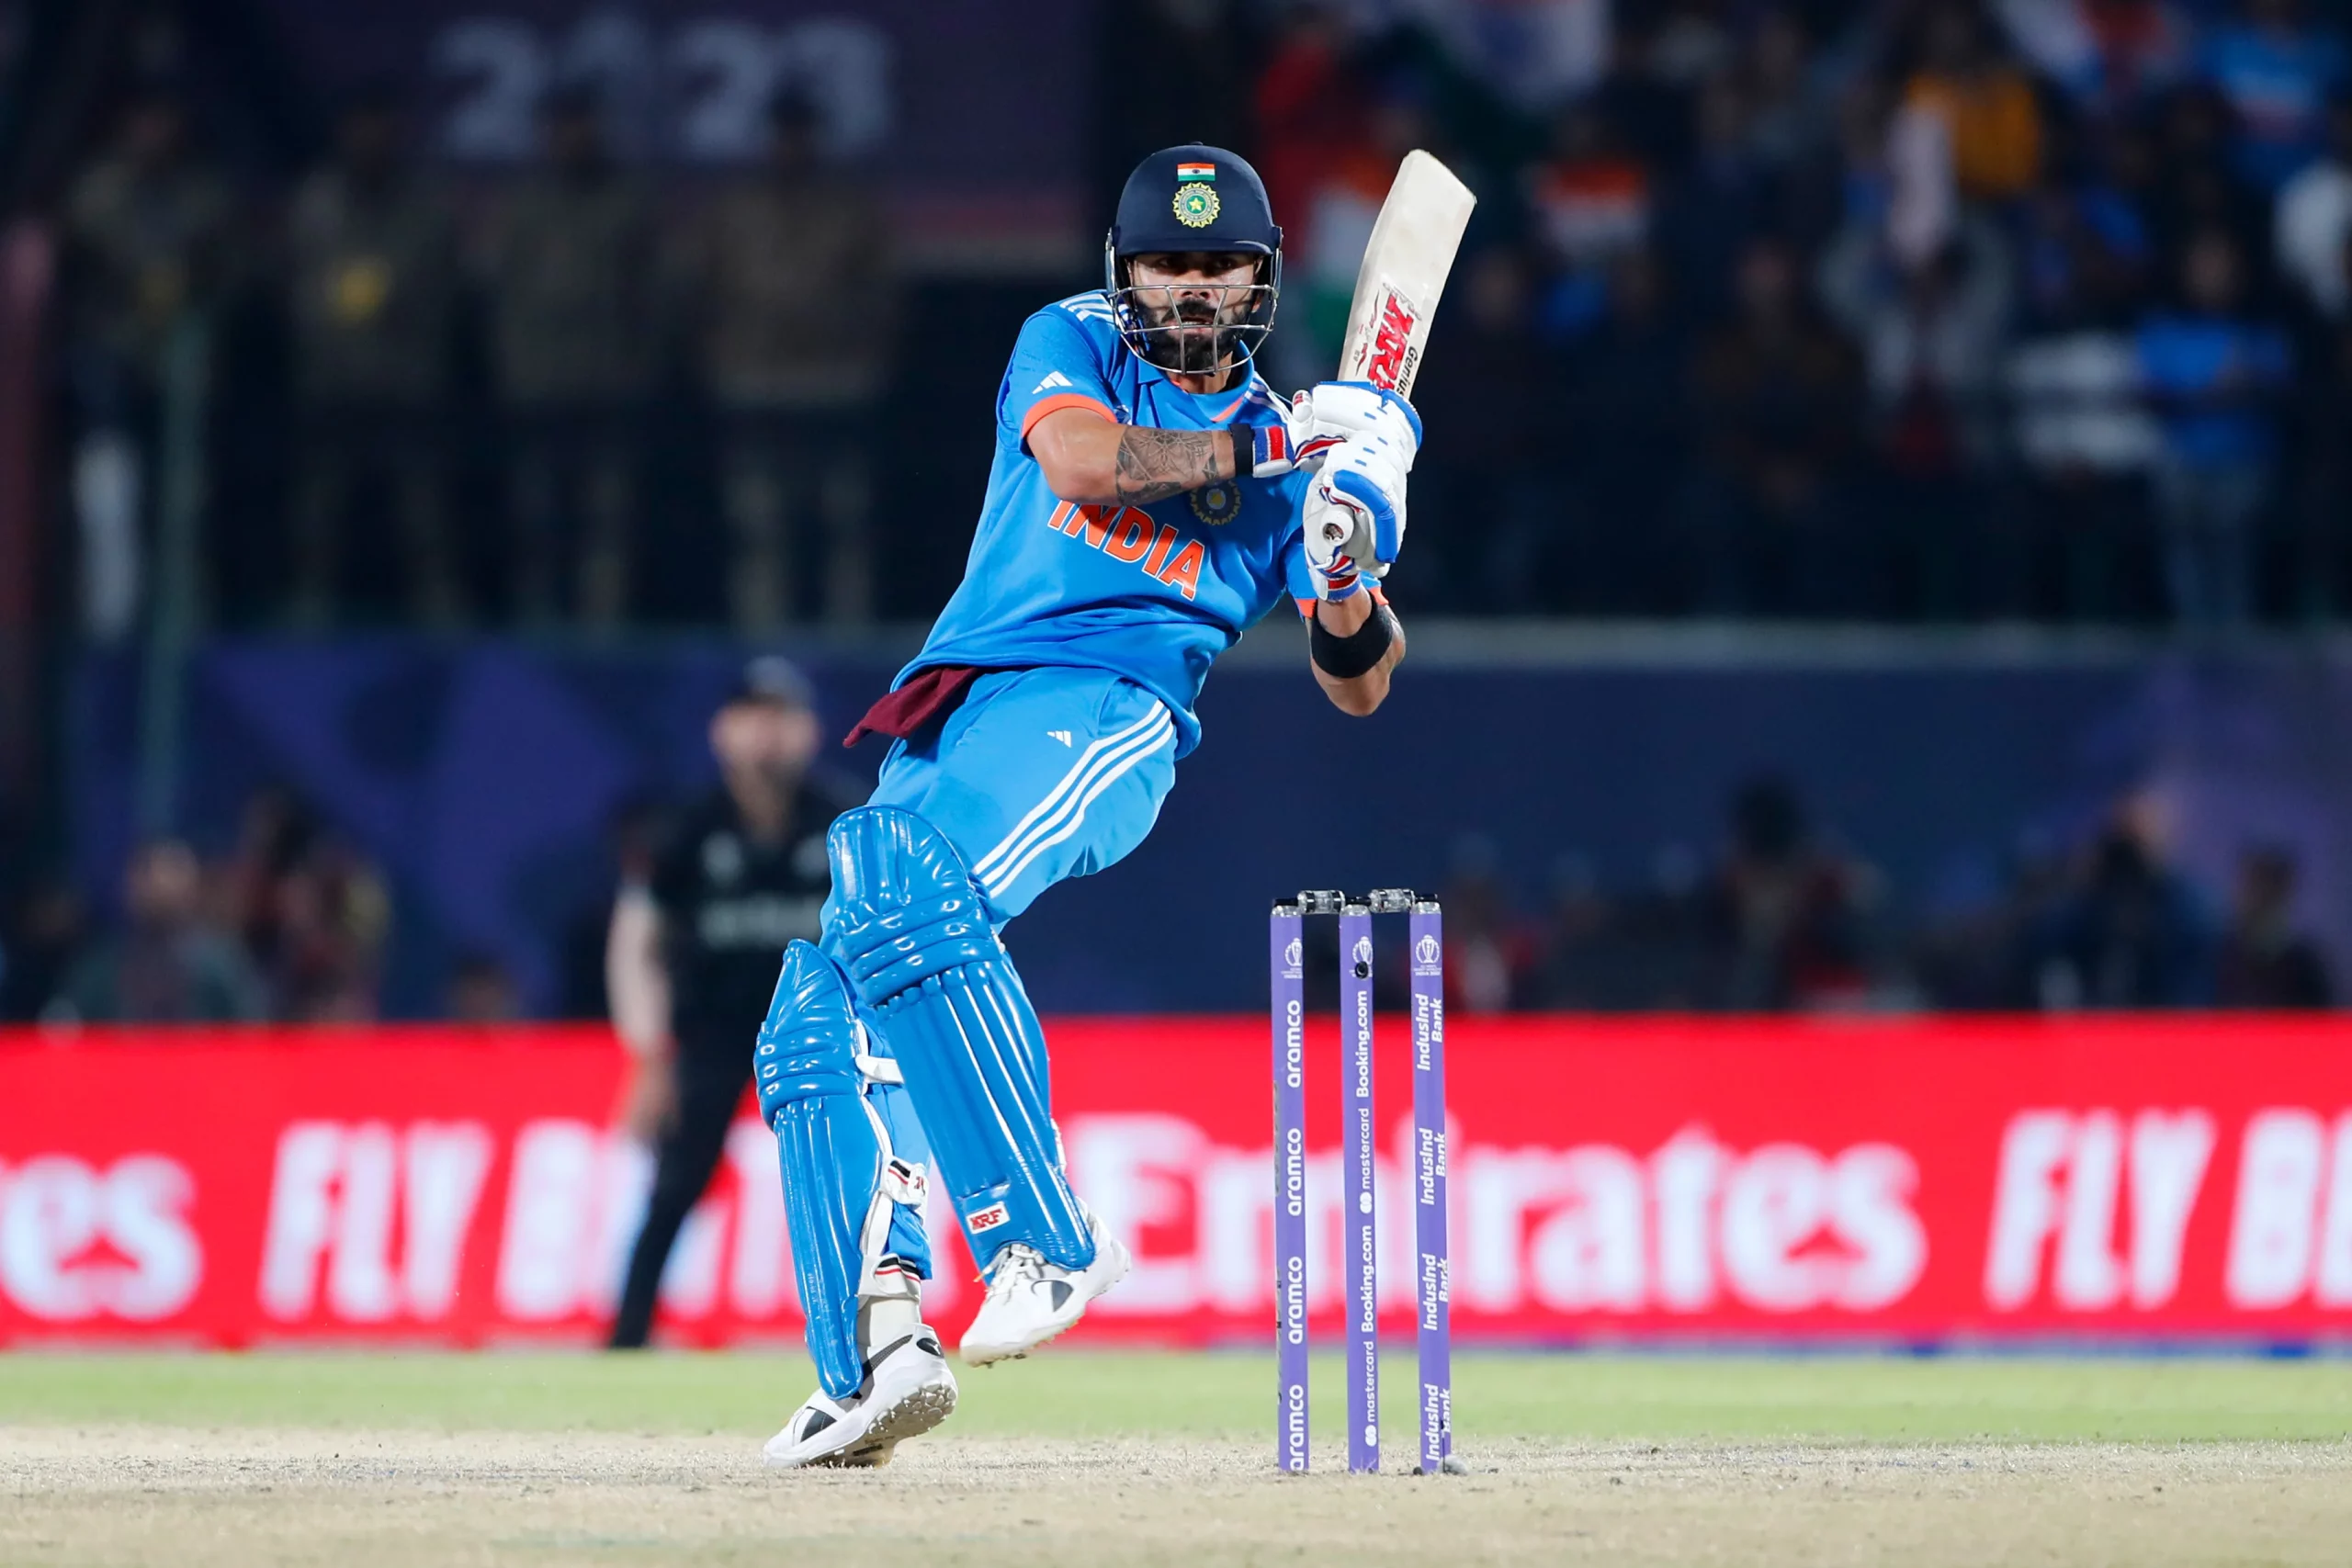 "It's Written In The Stars For Virat Kohli": Vaughan Makes Epic Lionel Messi Analogy